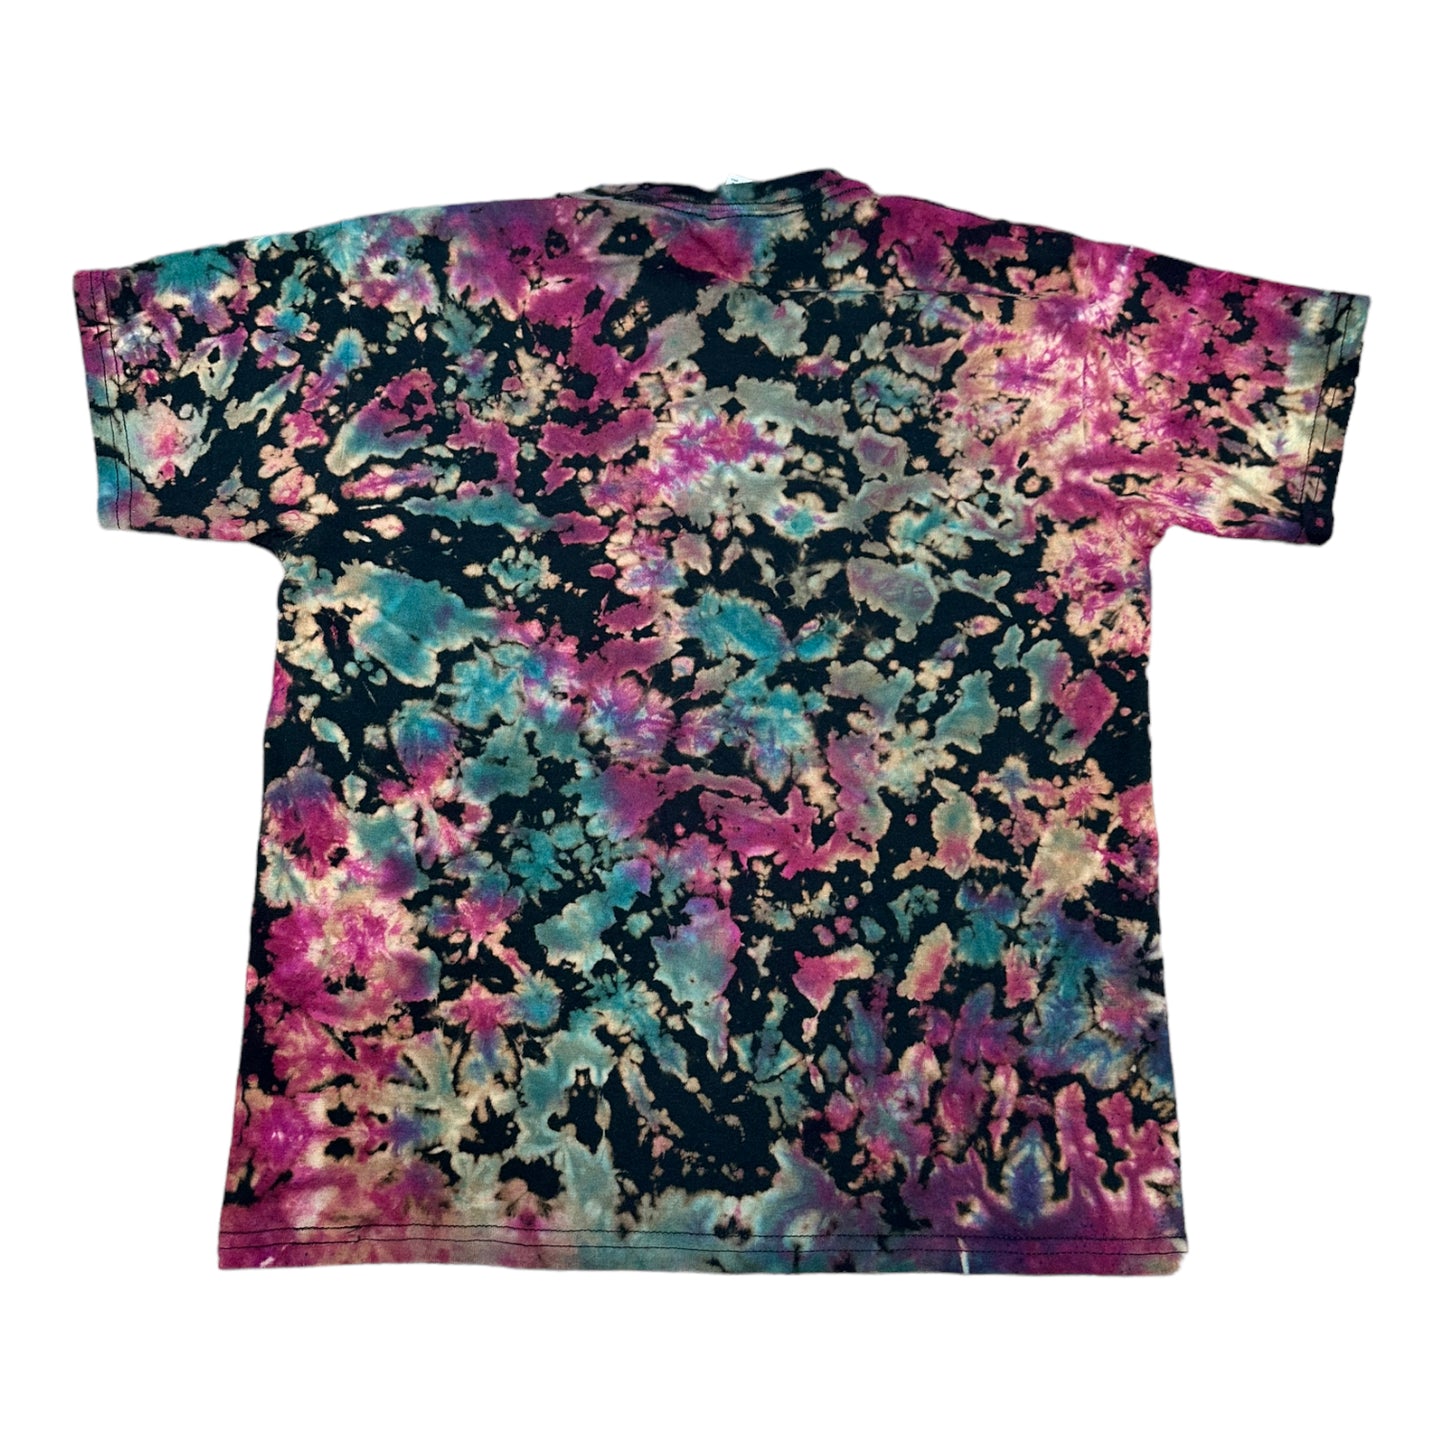 Youth Medium Purple and Turquoise Blue Scrunch Reverse Tie Dye Shirt